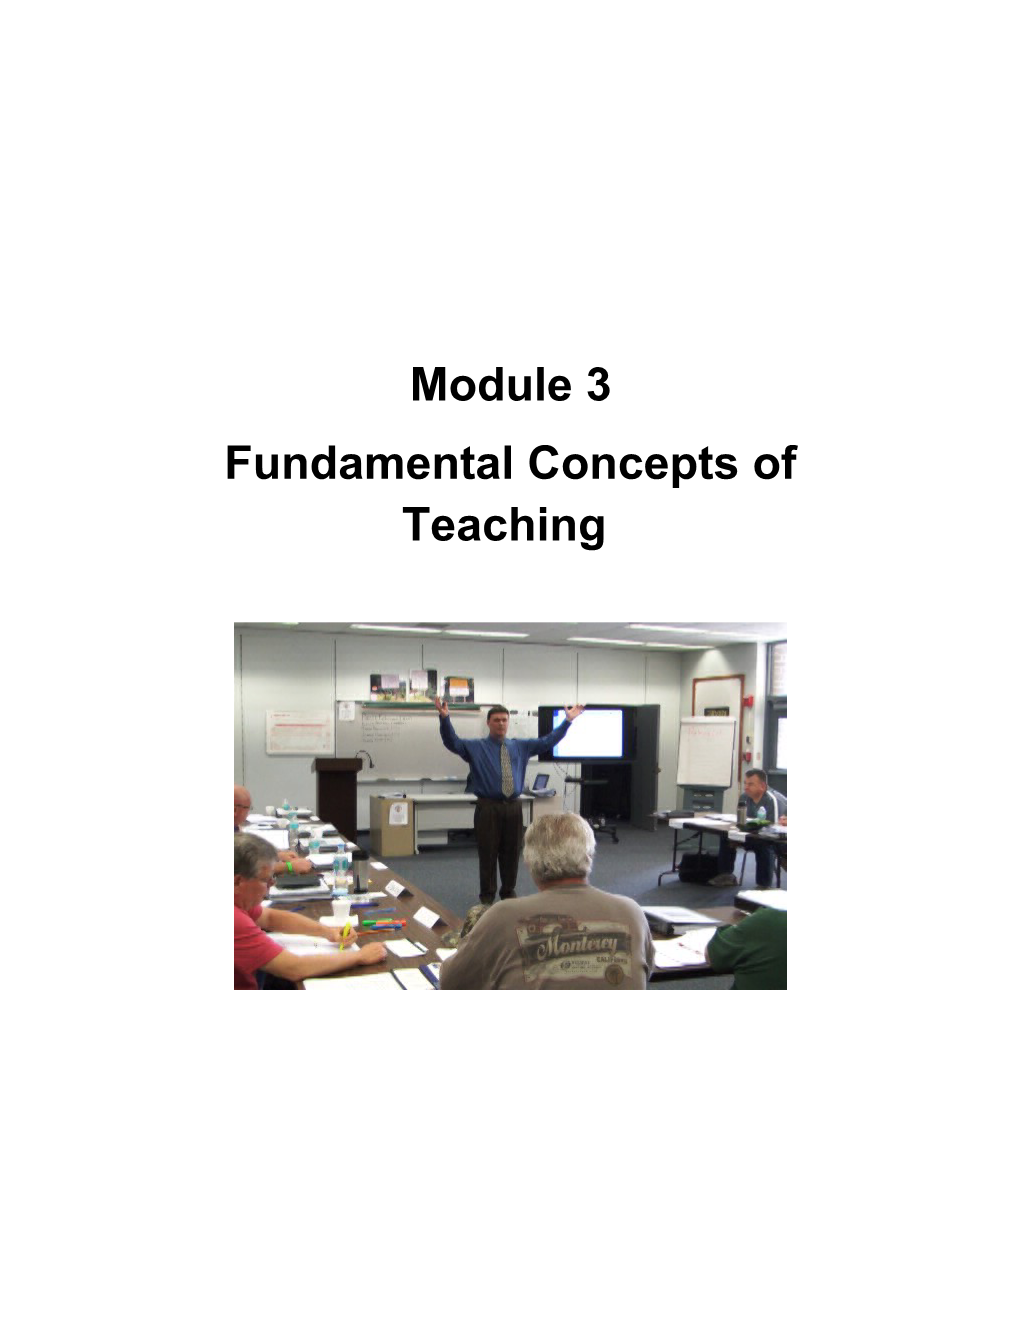 Fundamental Concepts of Teaching